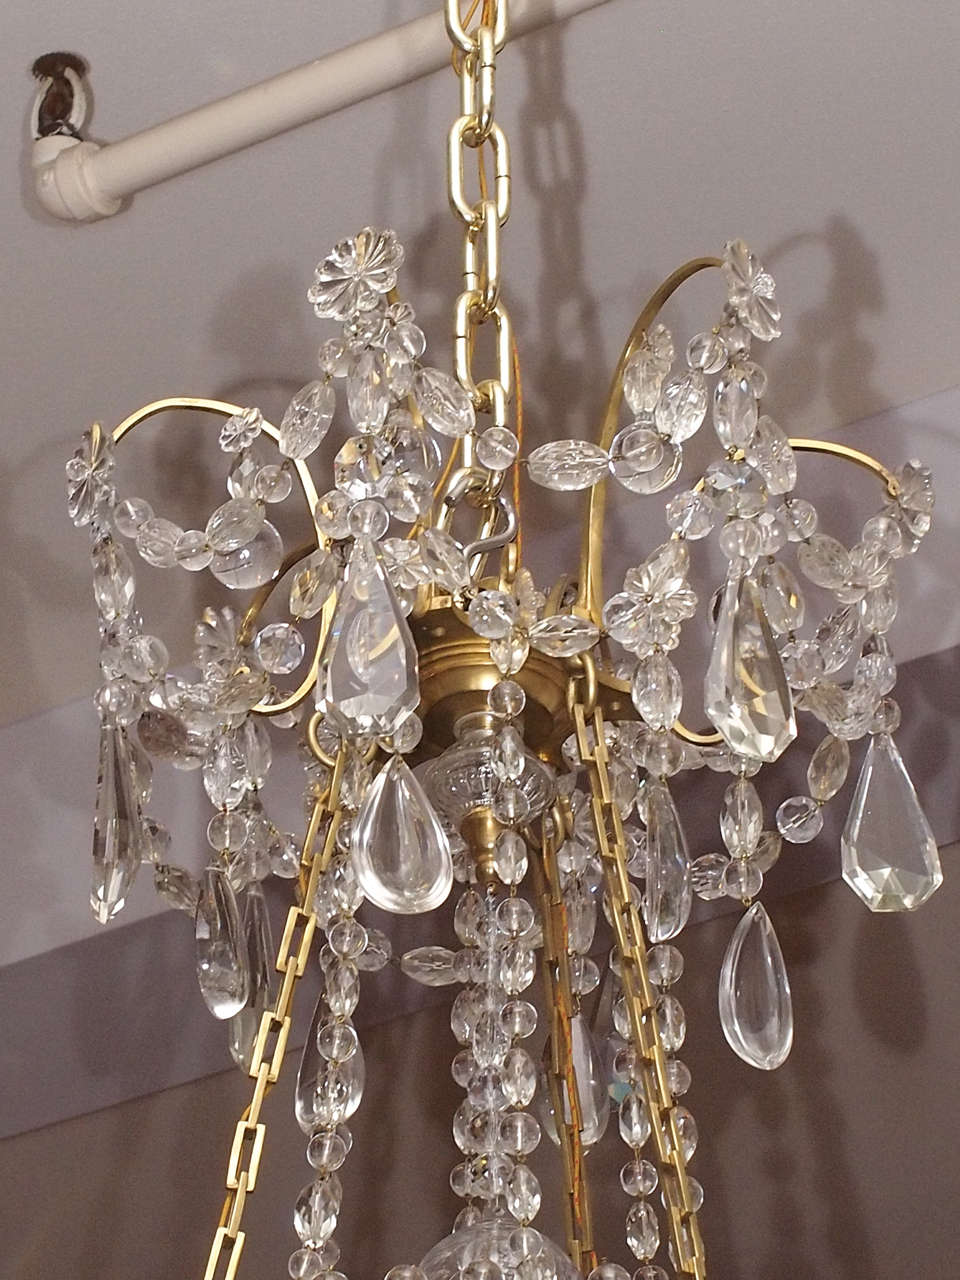 European Antique French Grand Size Louis XVI Bronze D'ore and Baccarat Chandelier